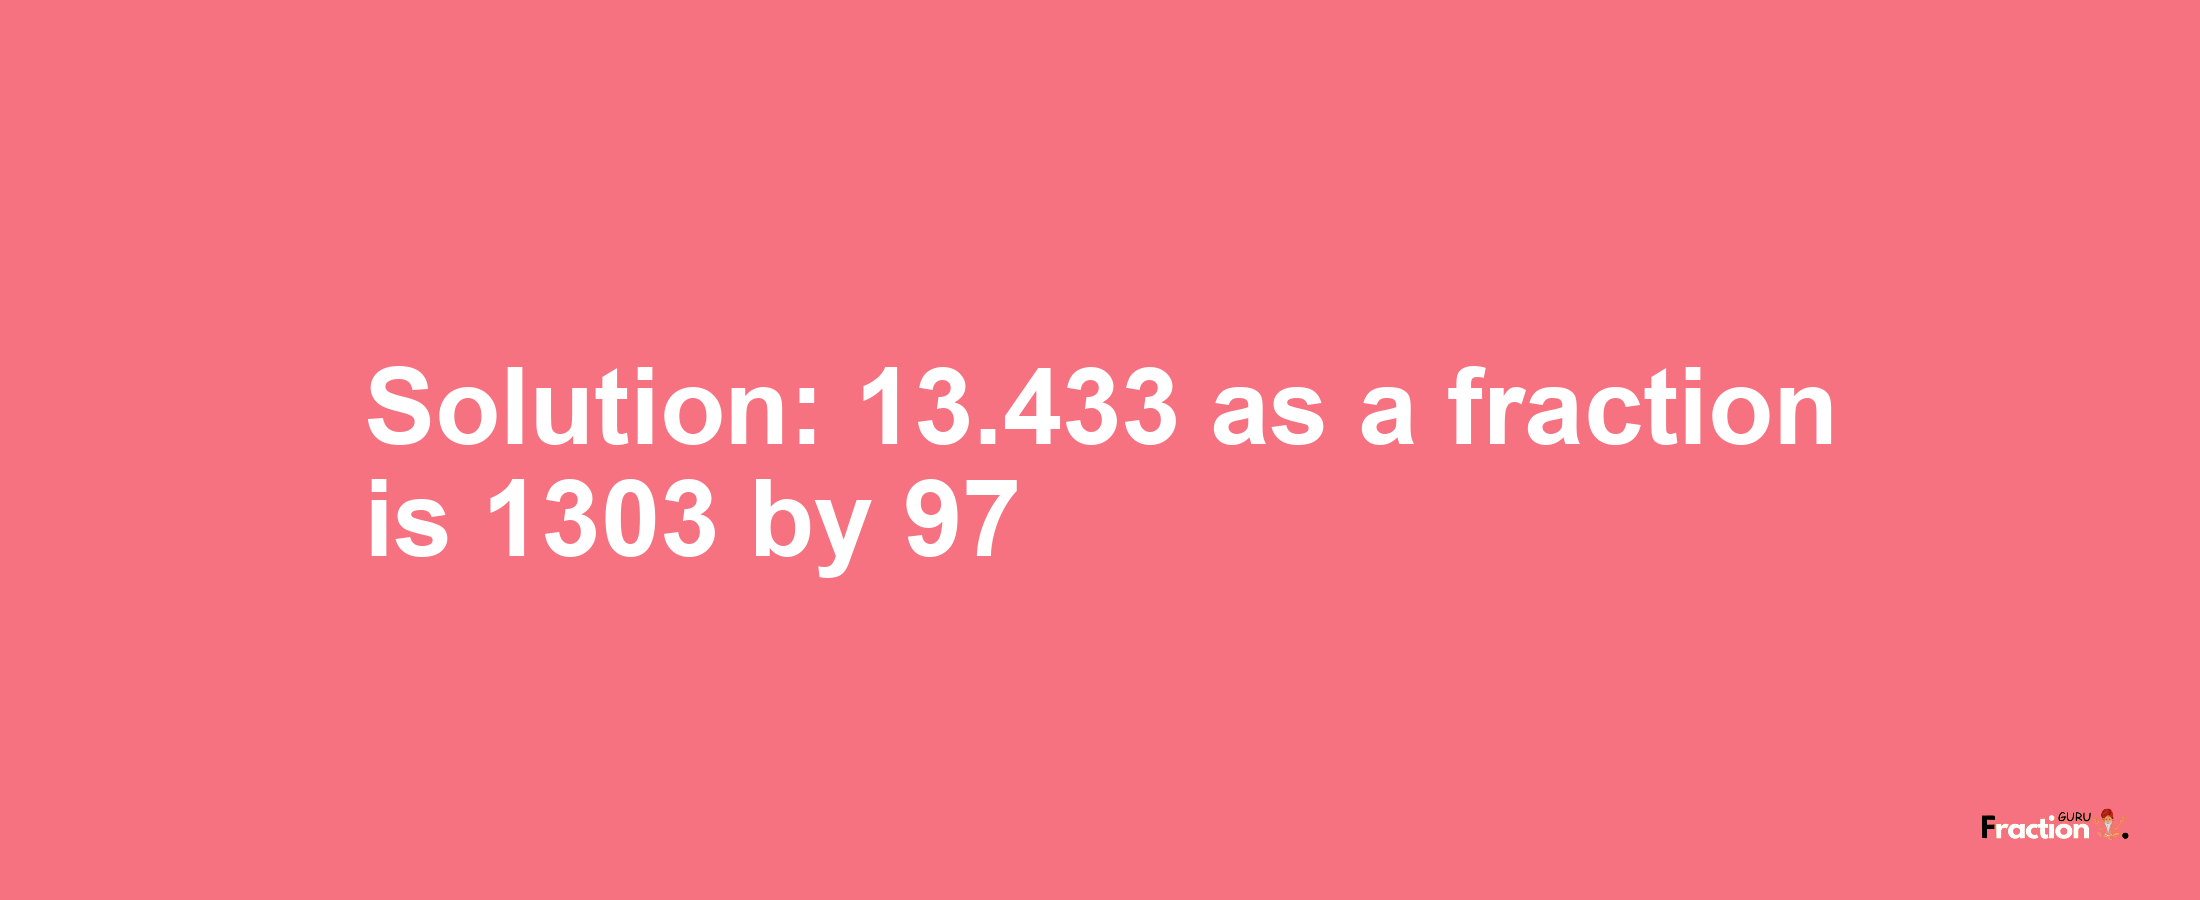 Solution:13.433 as a fraction is 1303/97